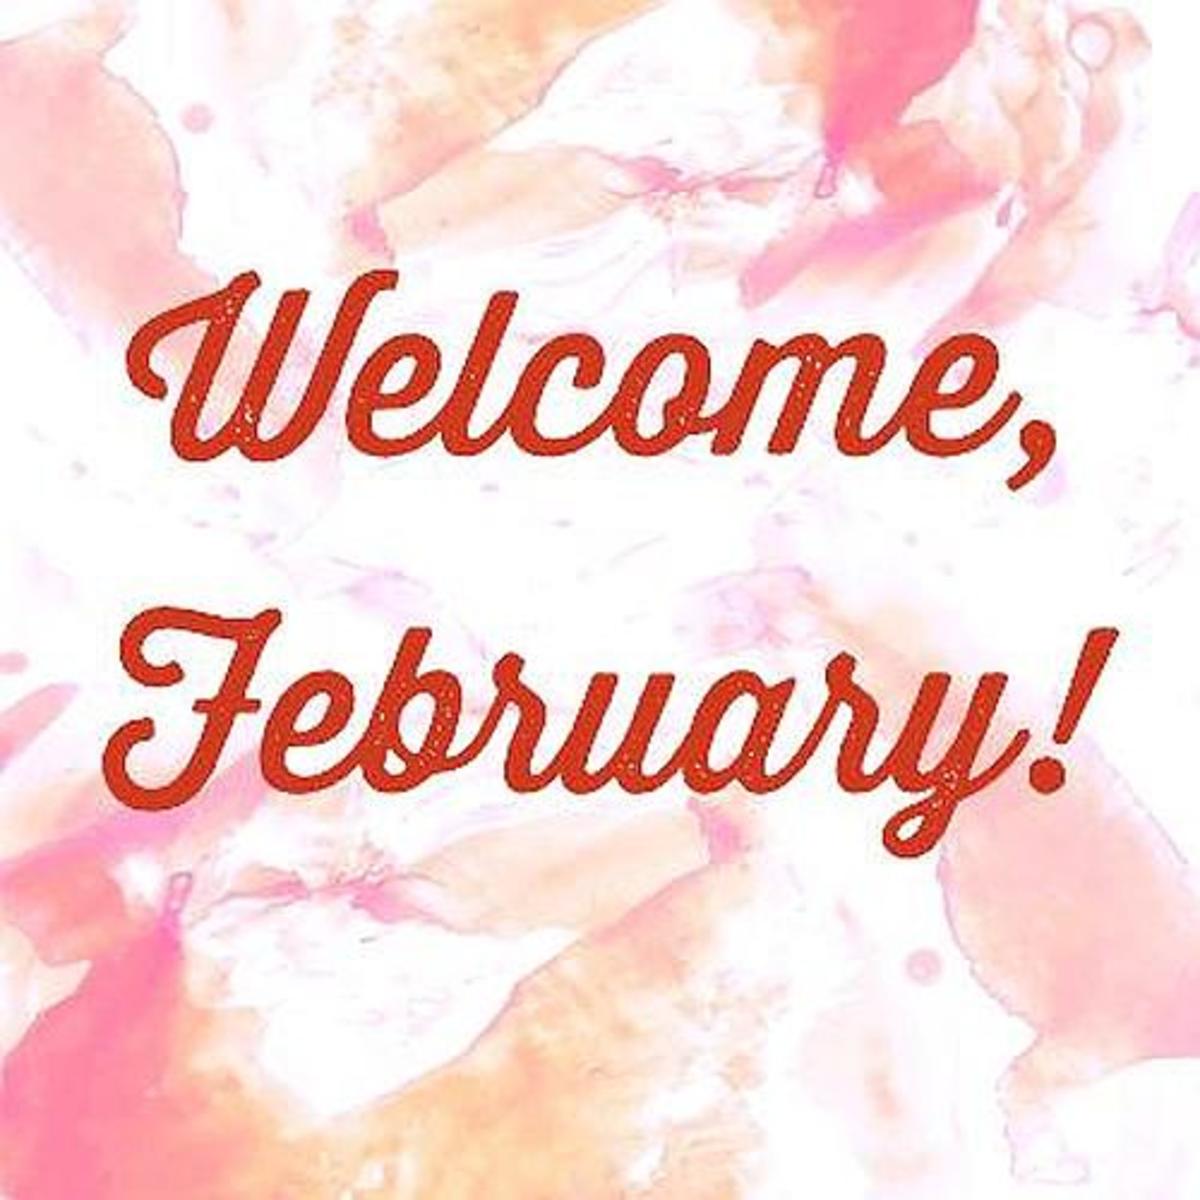 february-interesting-things-about-the-month